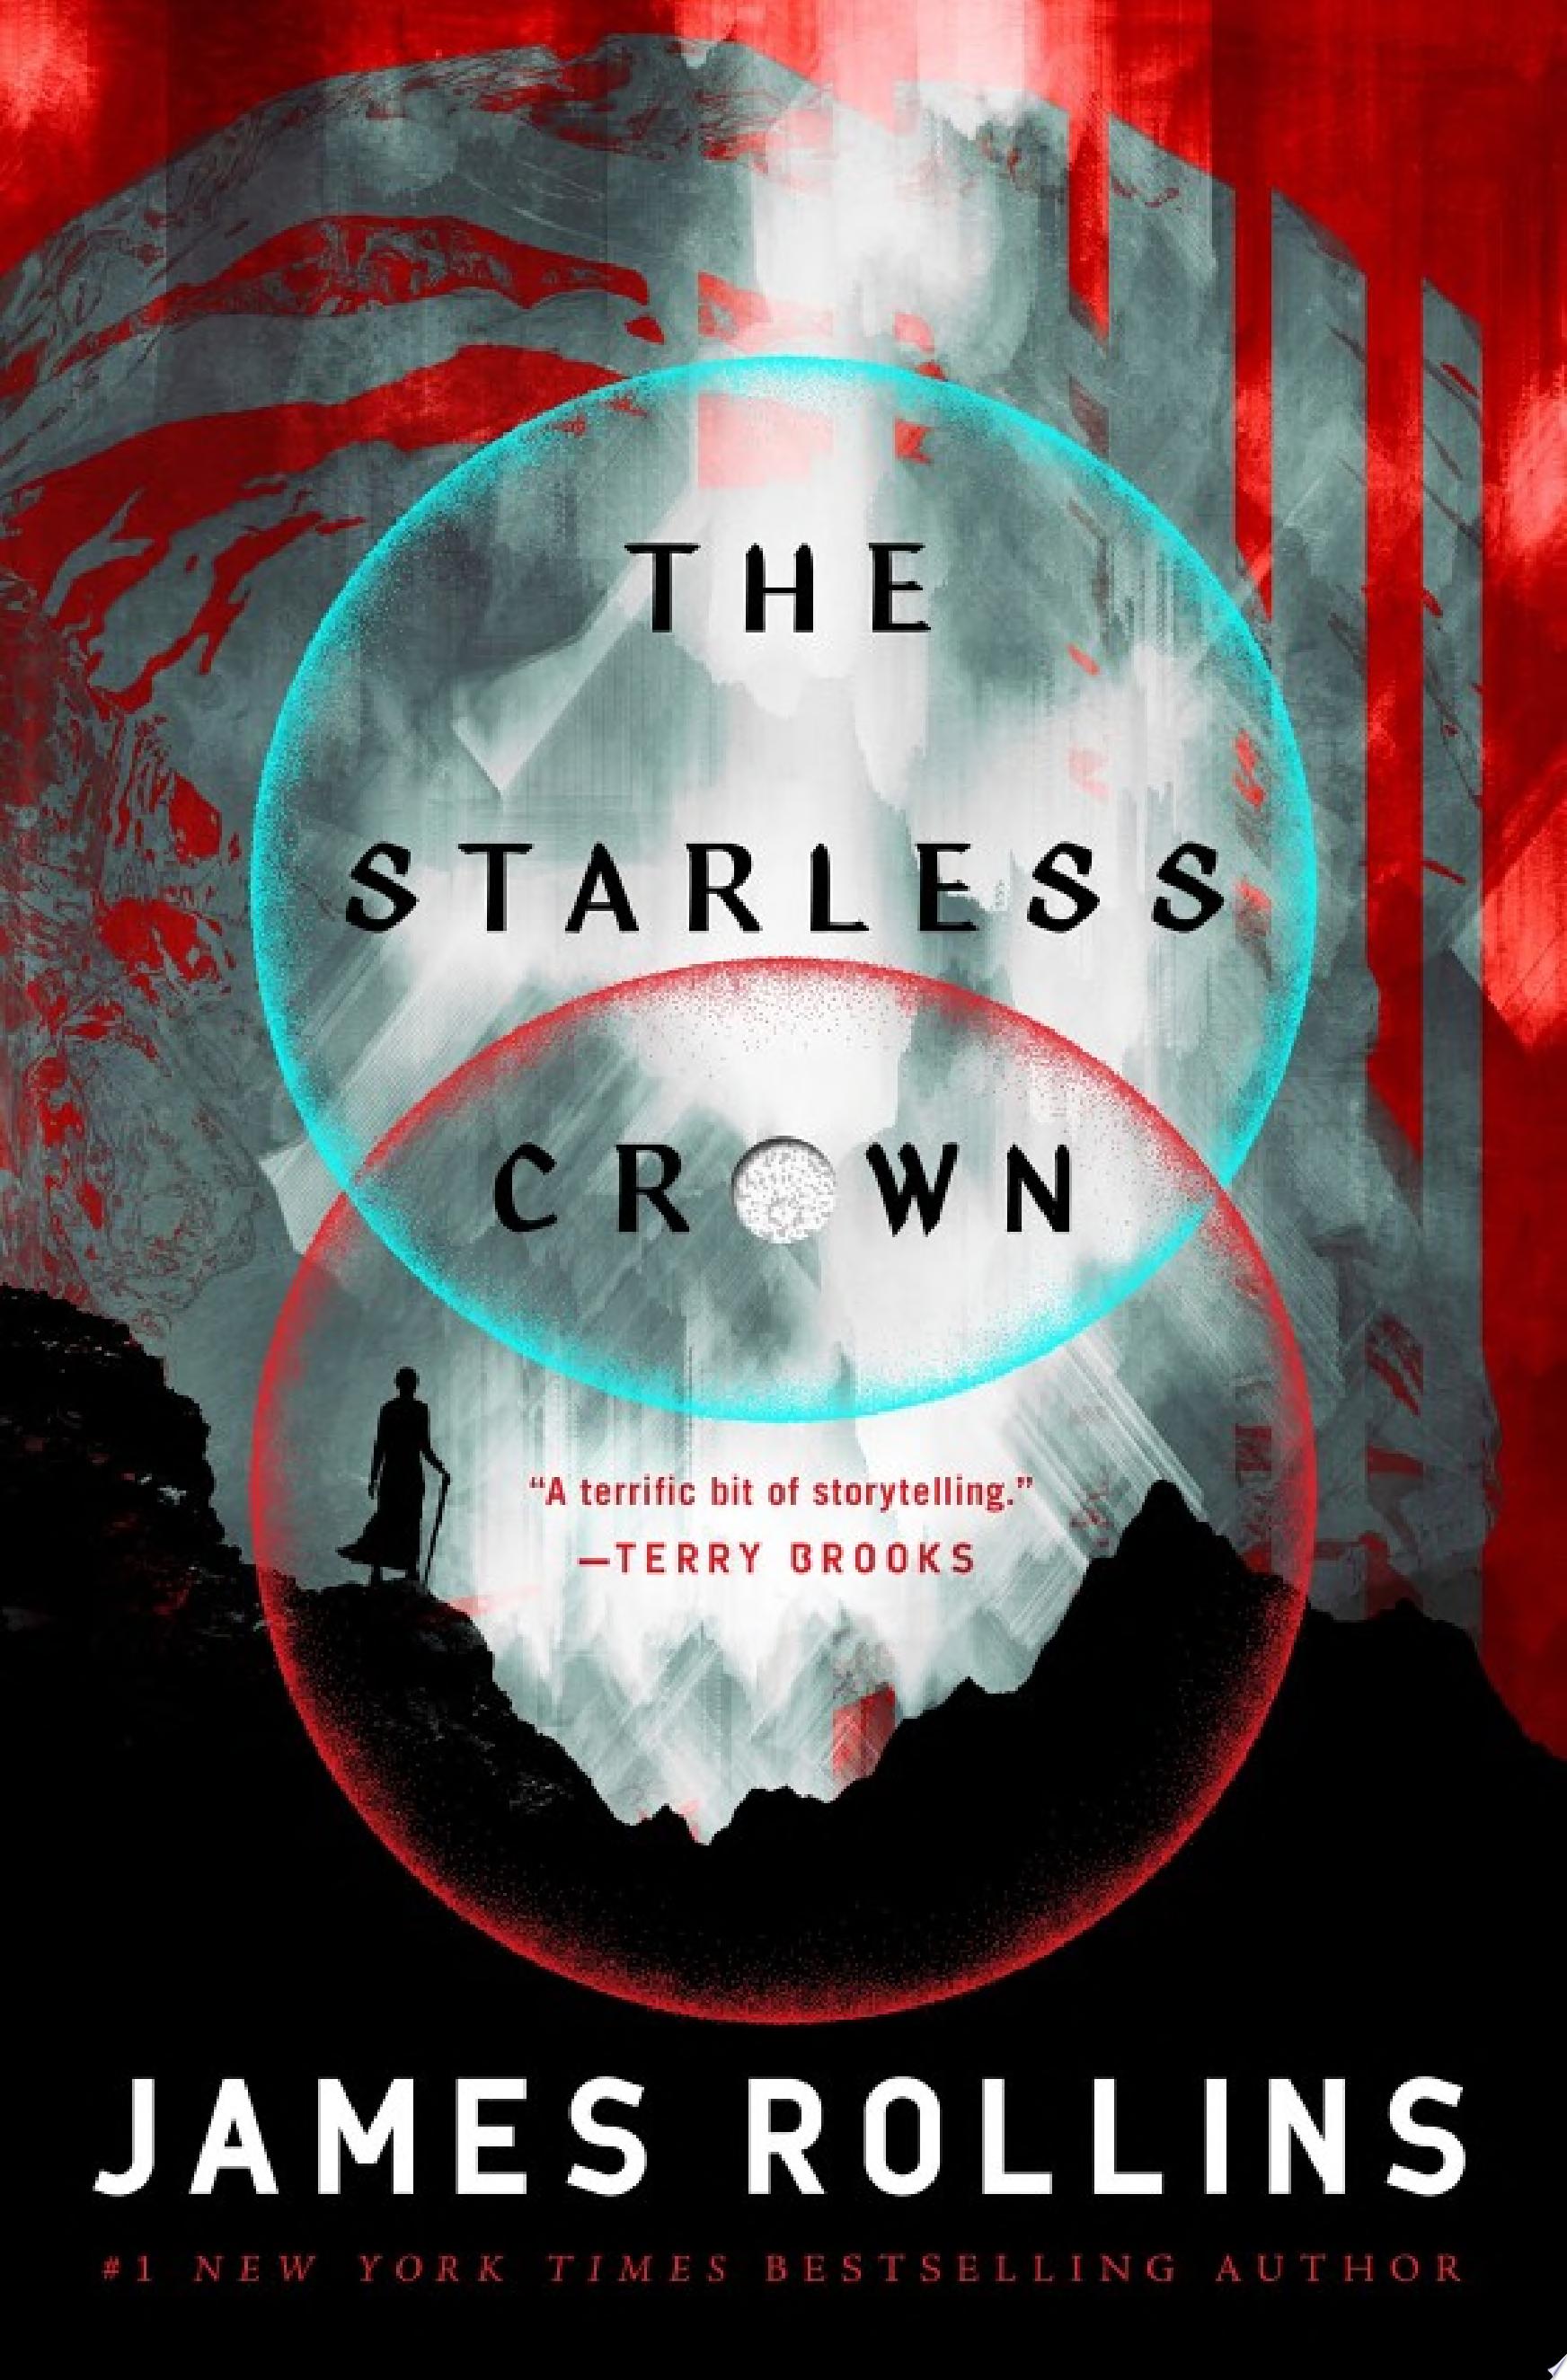 Image for "The Starless Crown"